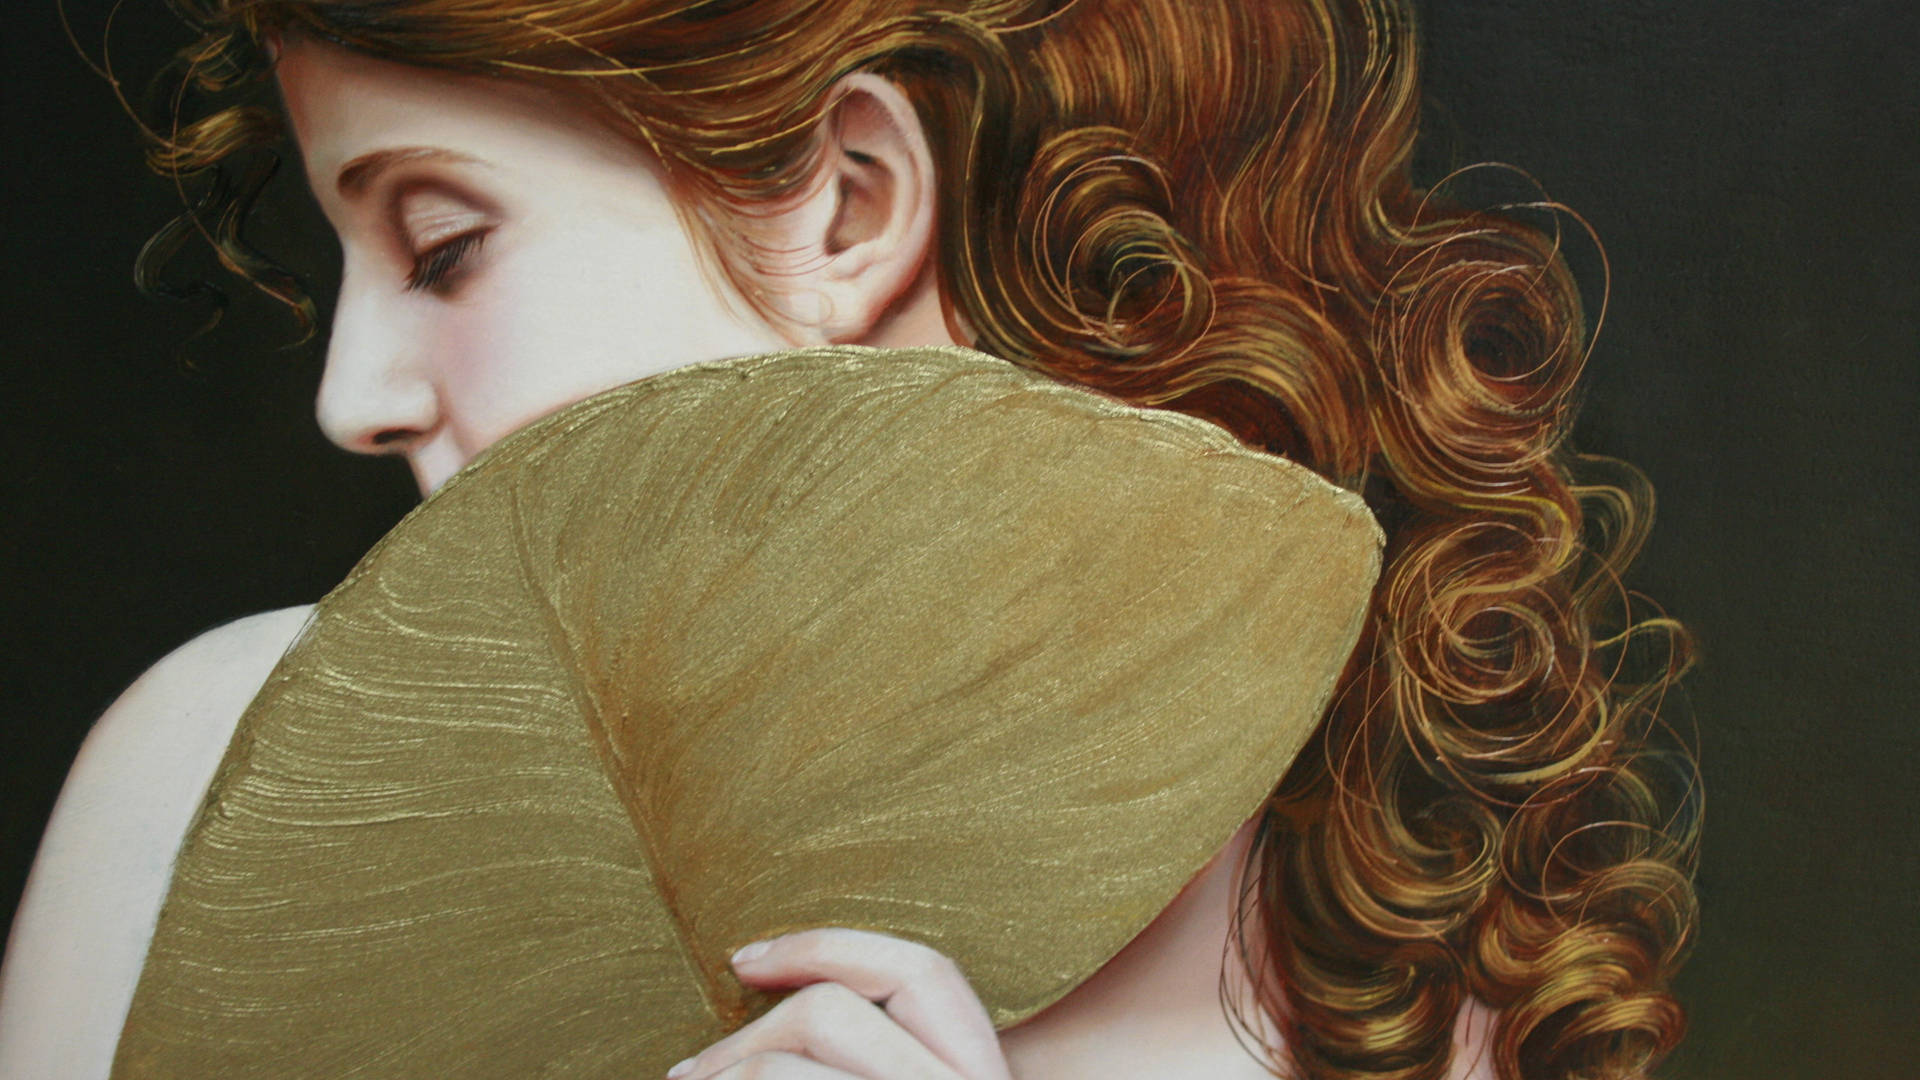 Red Hair Woman Painting By Christiane Vleugels Background